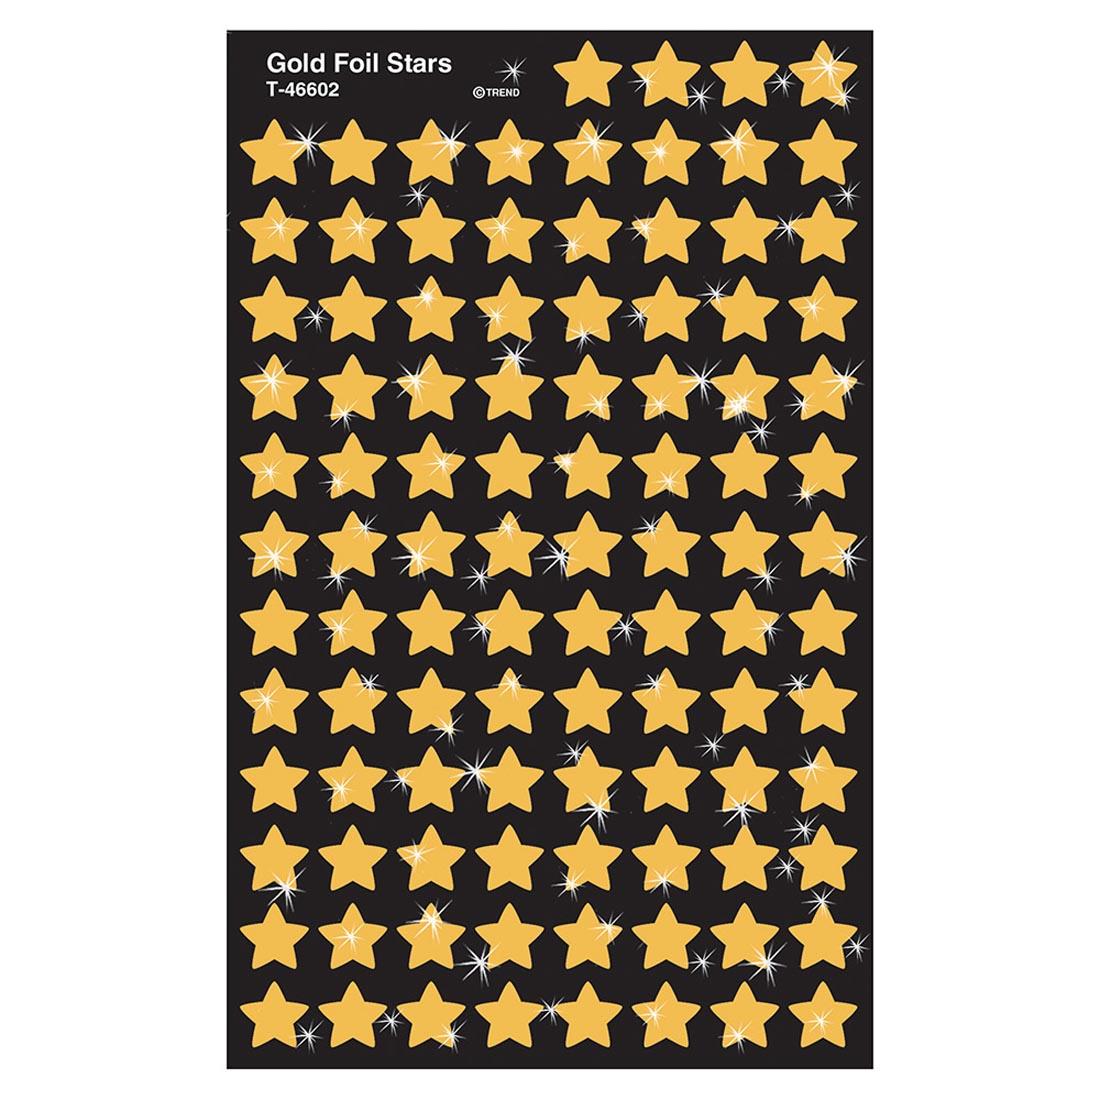 TREND Gold Foil Stars superShapes Stickers